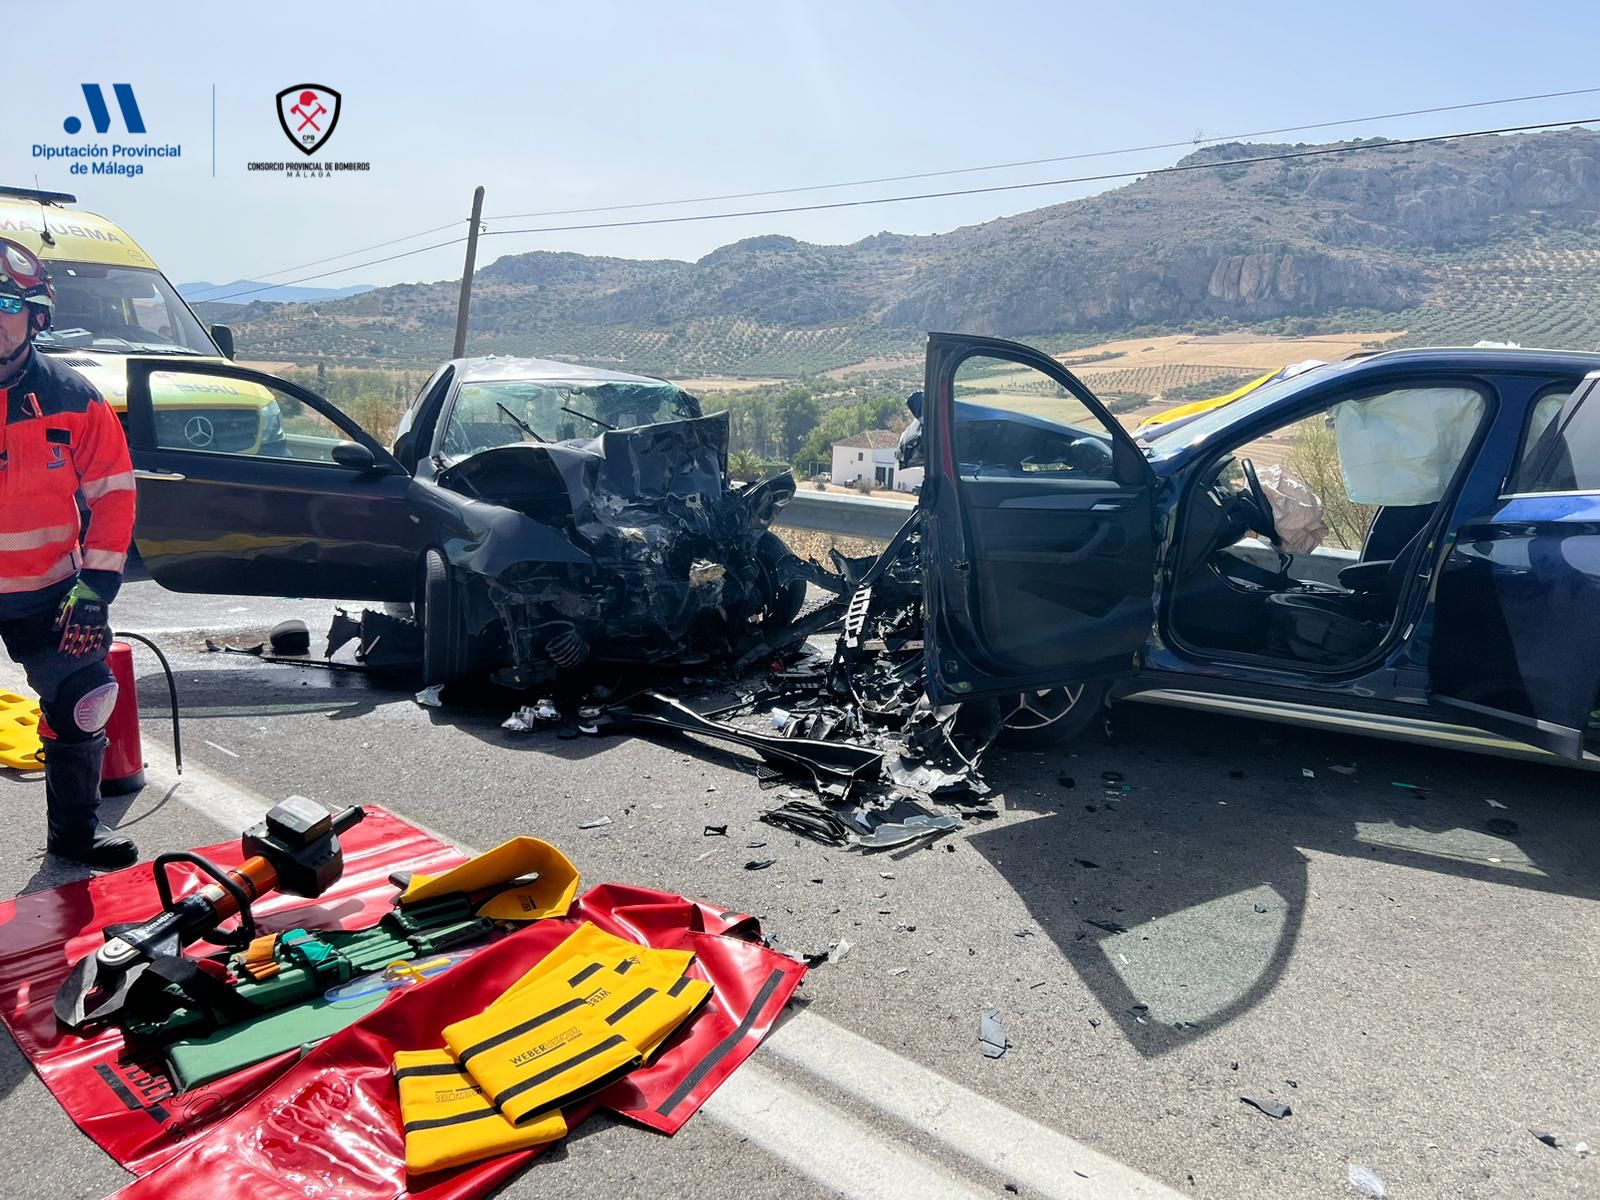 Imagen secundaria 1 - Serious traffic accident leaves seven people injured and forces closure of main A-367 road to Ronda